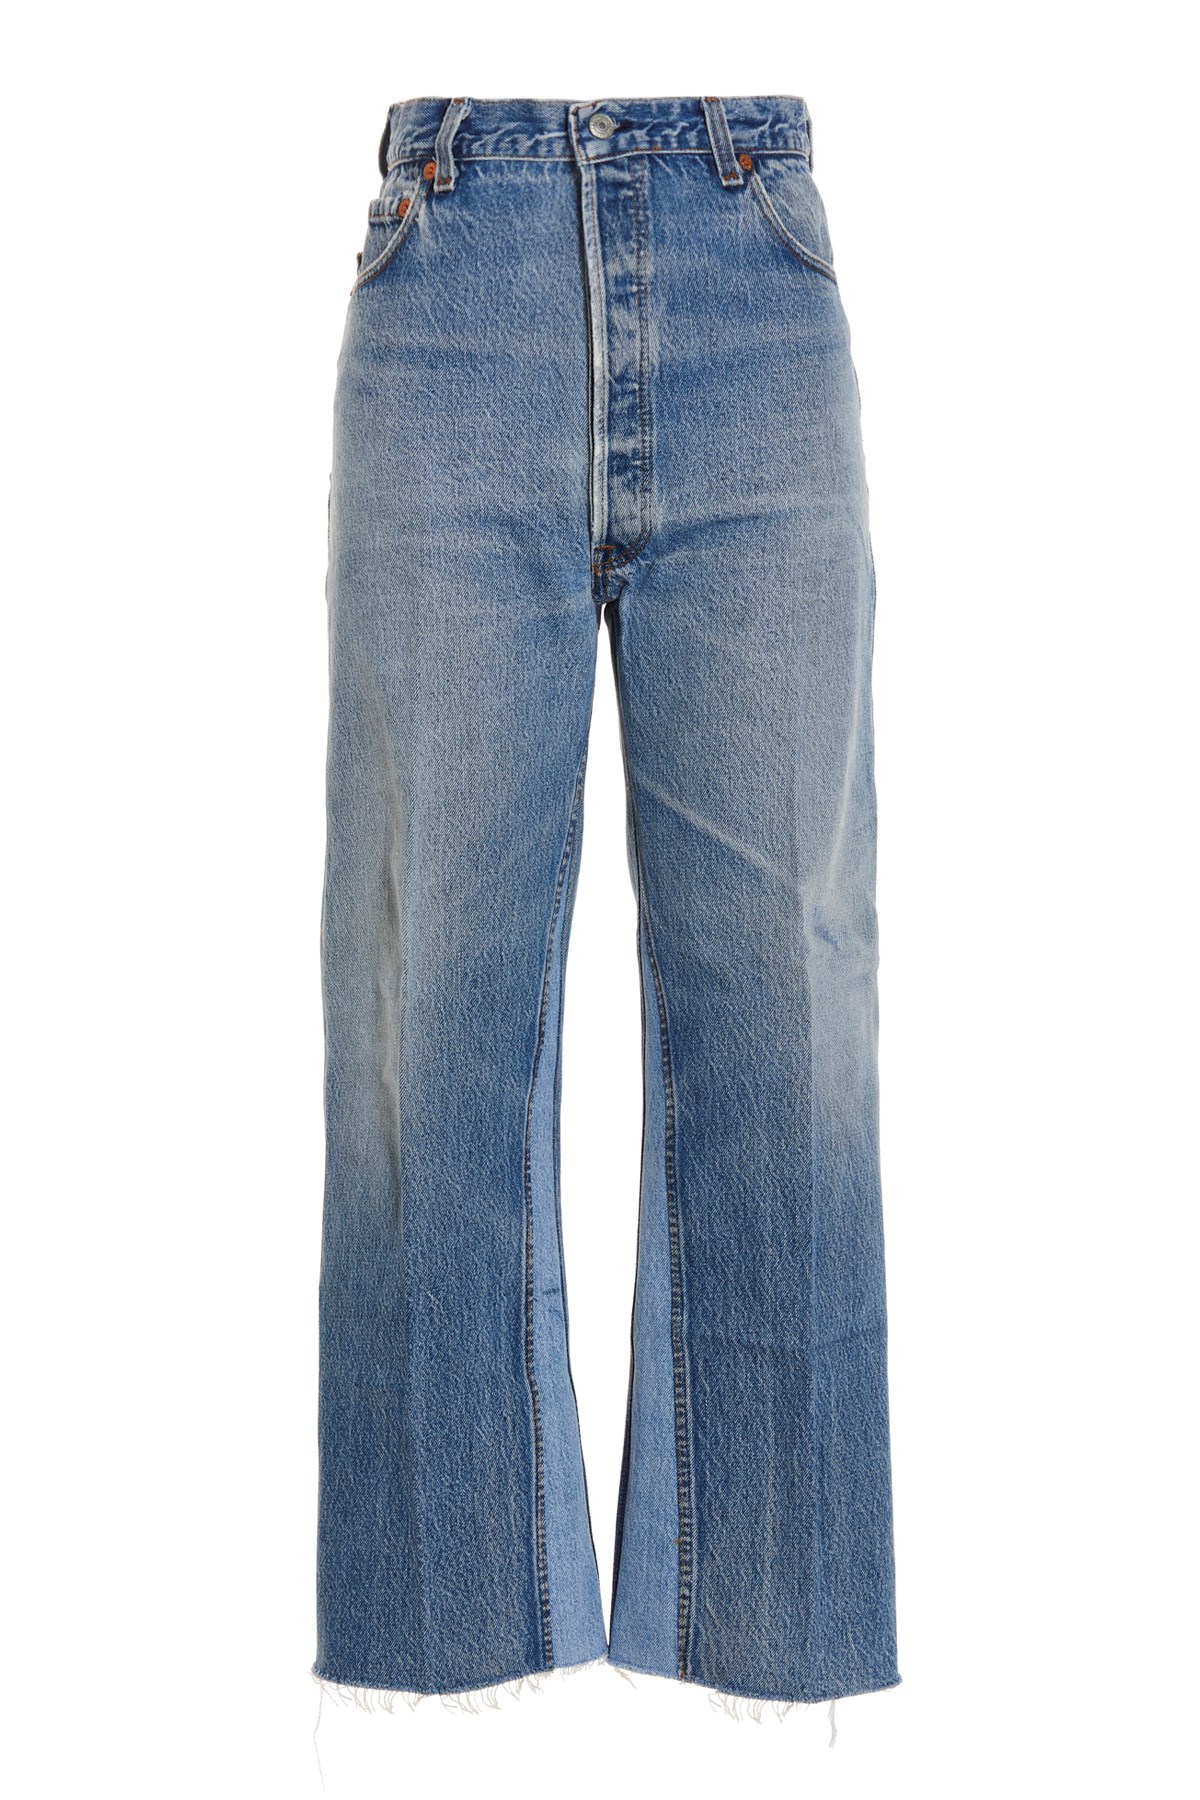 RE/DONE Cropped-Jeans Mit Hoher Taille